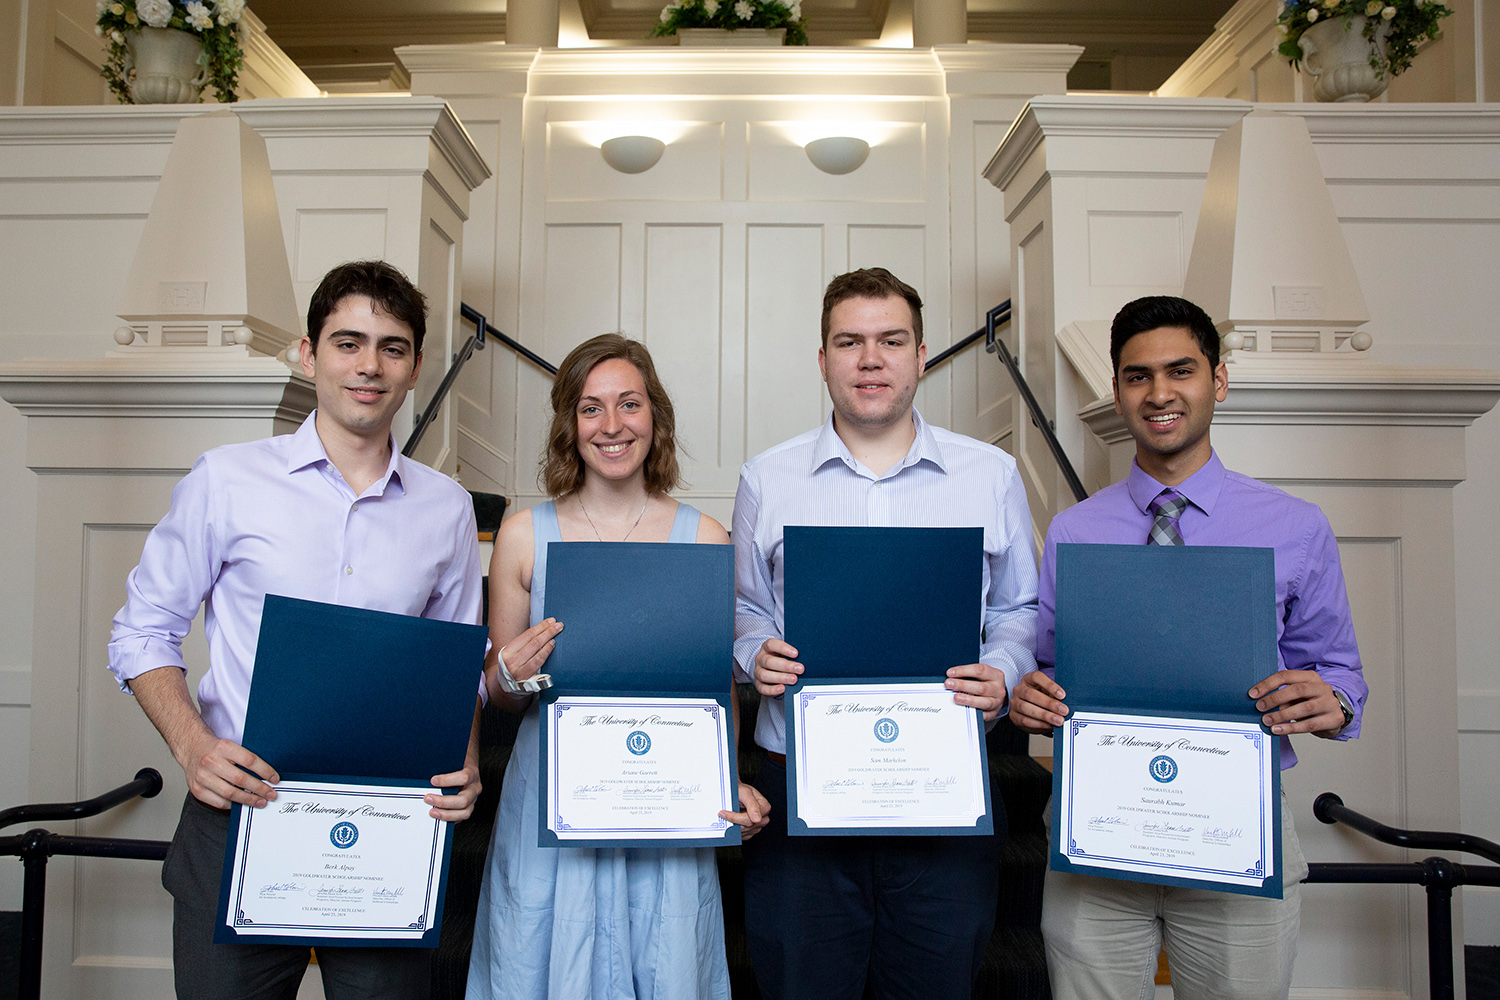 UConn's 2019 Goldwater Scholars during the Office of National Scholarships and Fellowships' 2019 Celebration of Excellence at the Alumni Center on April 23. This year for the first time, all four of the UConn students nominated as Goldwater Scholars were successful. (Bri Diaz/UConn Photo)